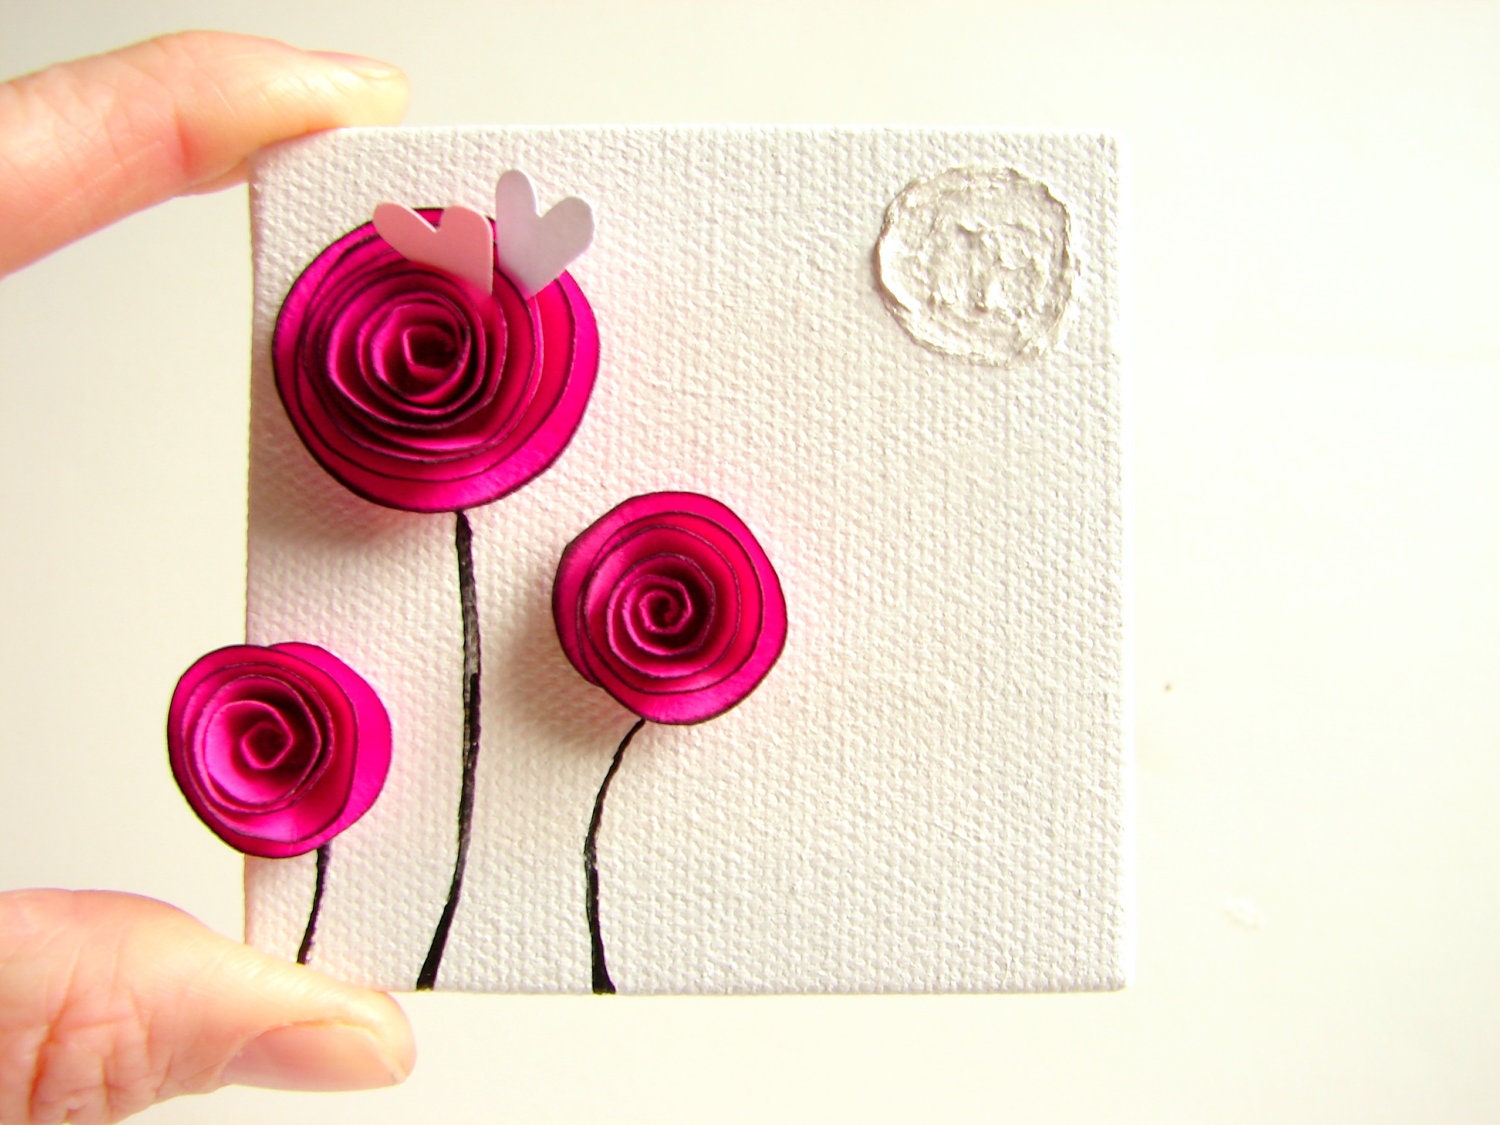 Any 3 Paper Rosette Mini Mixed Media Art Pieces-Your Choice